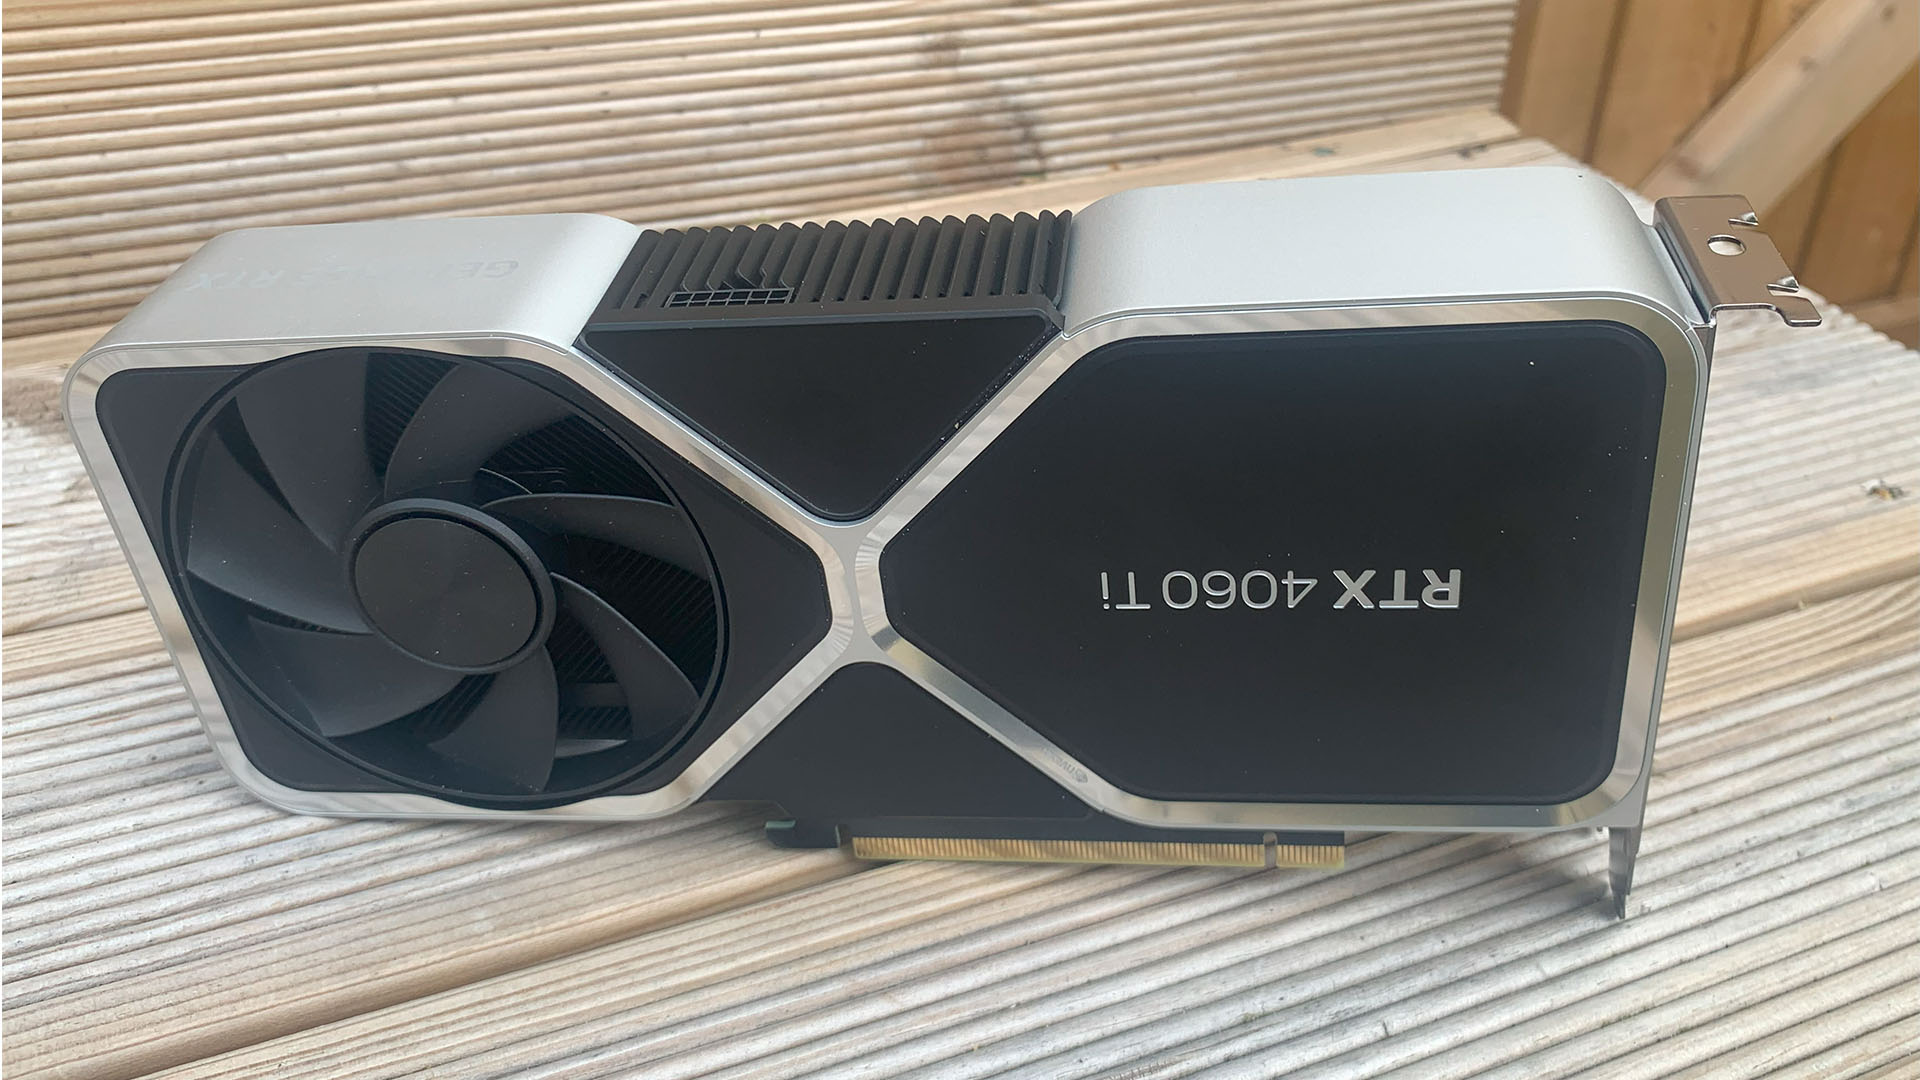 Nvidia GeForce RTX 4060 Ti Founders Edition